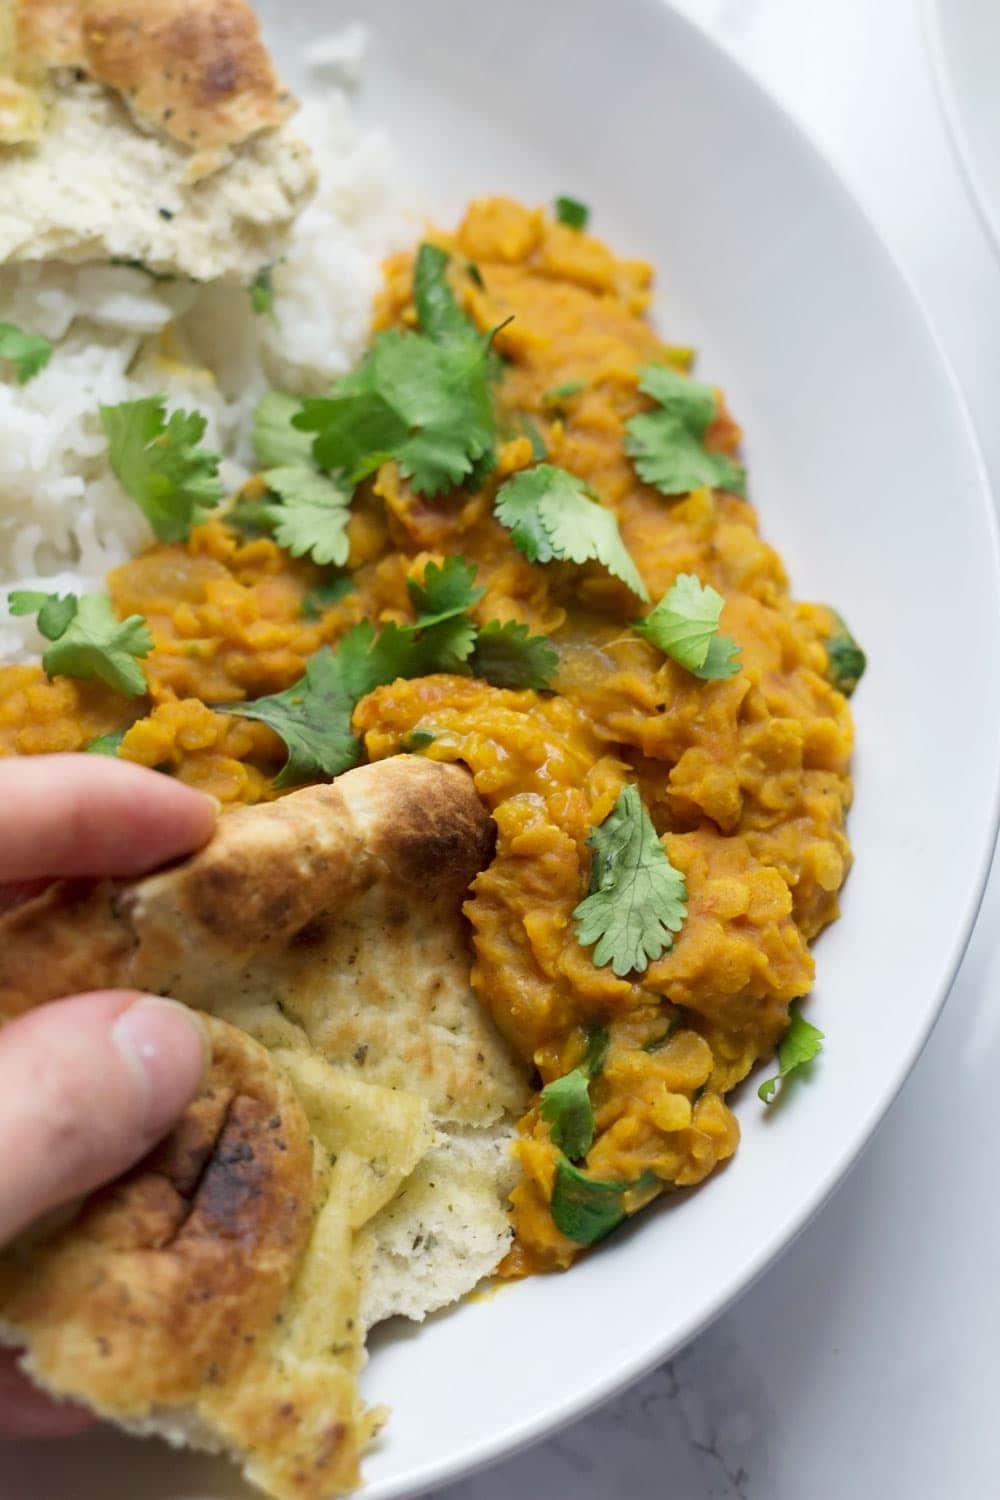 This red lentil dal is perfect when you're craving that curry flavour but you want something quick and healthy. Serve with yoghurt and mango chutney.